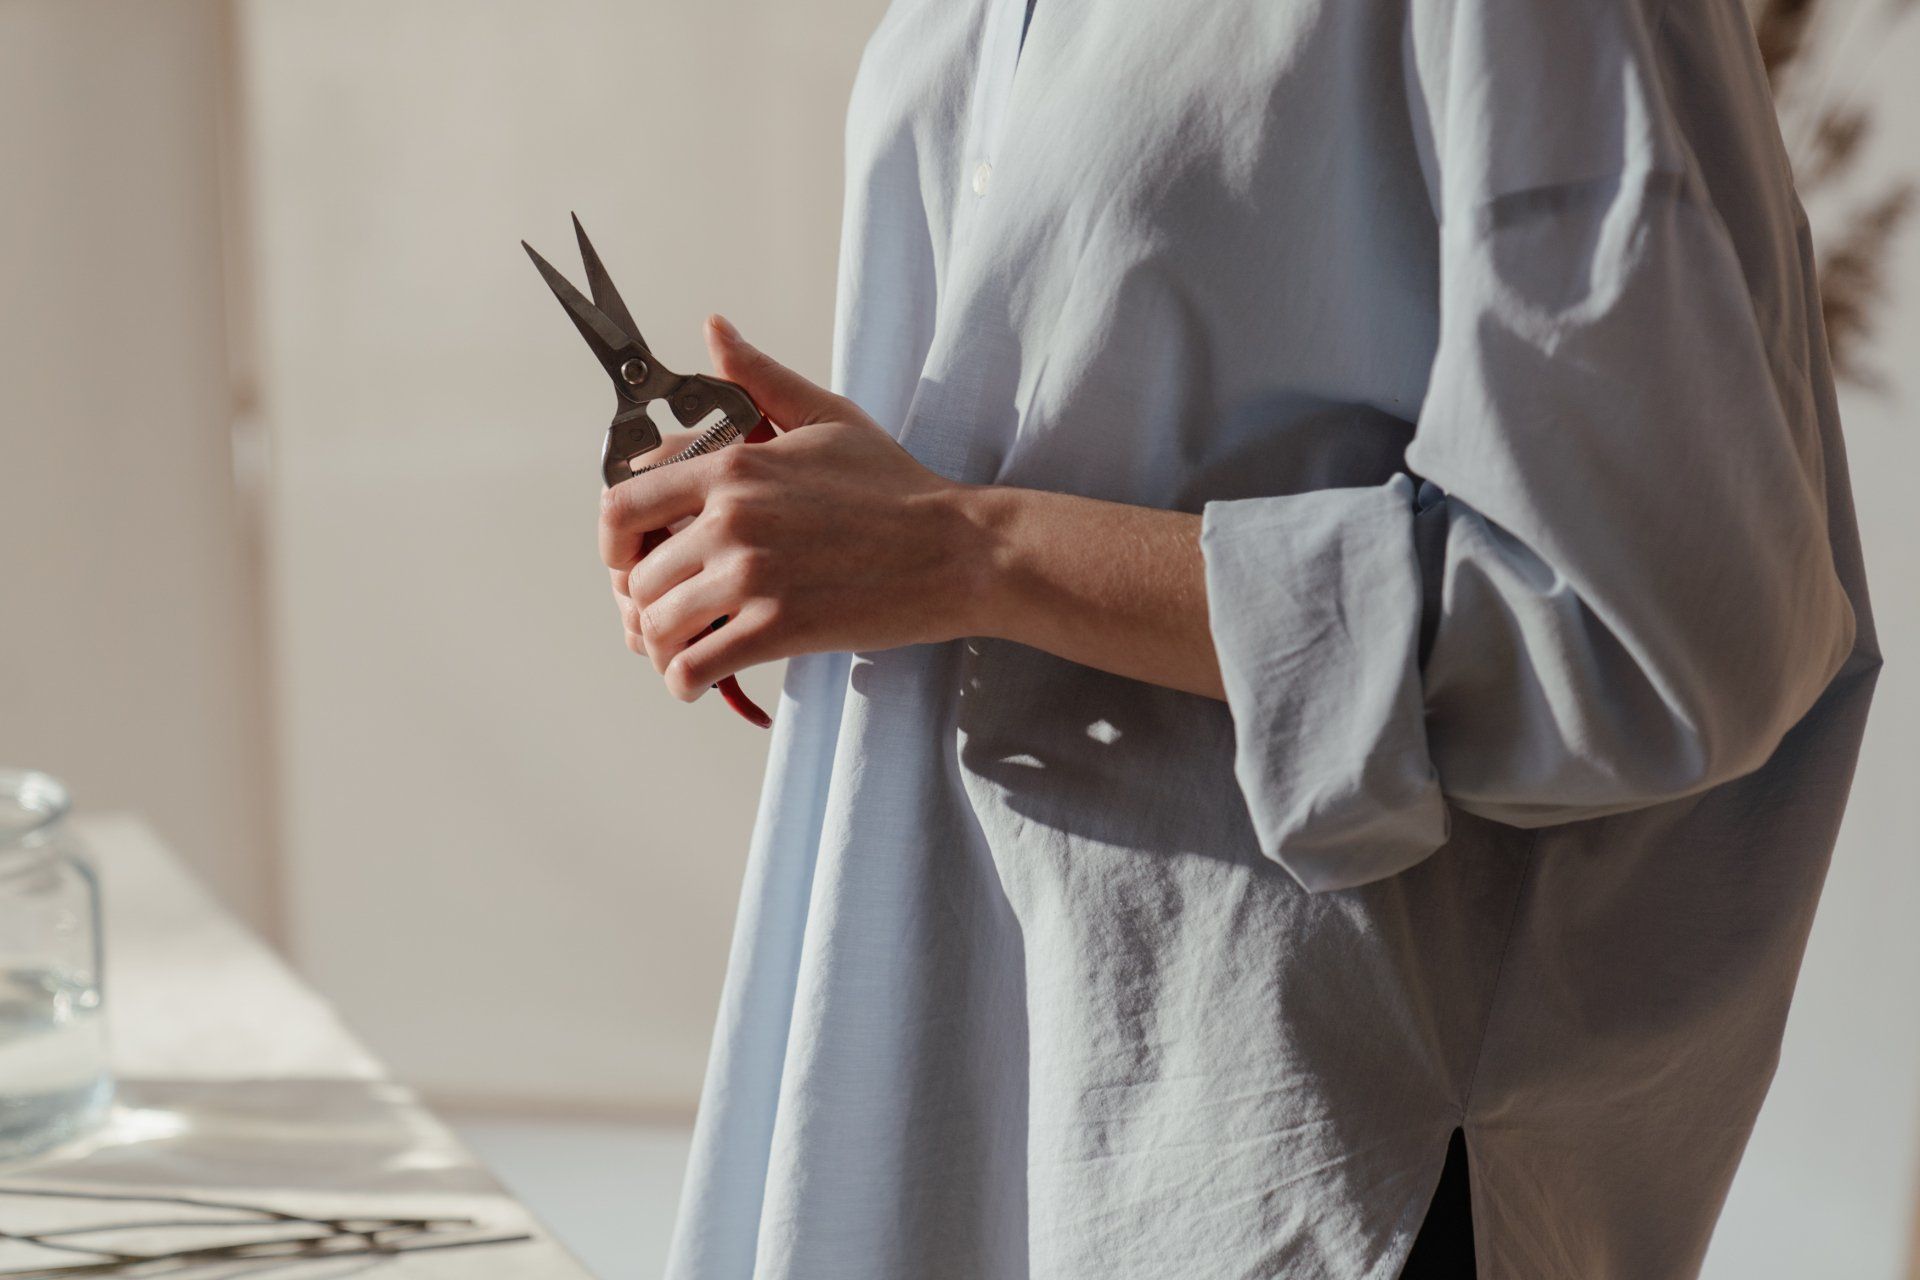 a person holding a pruning tool